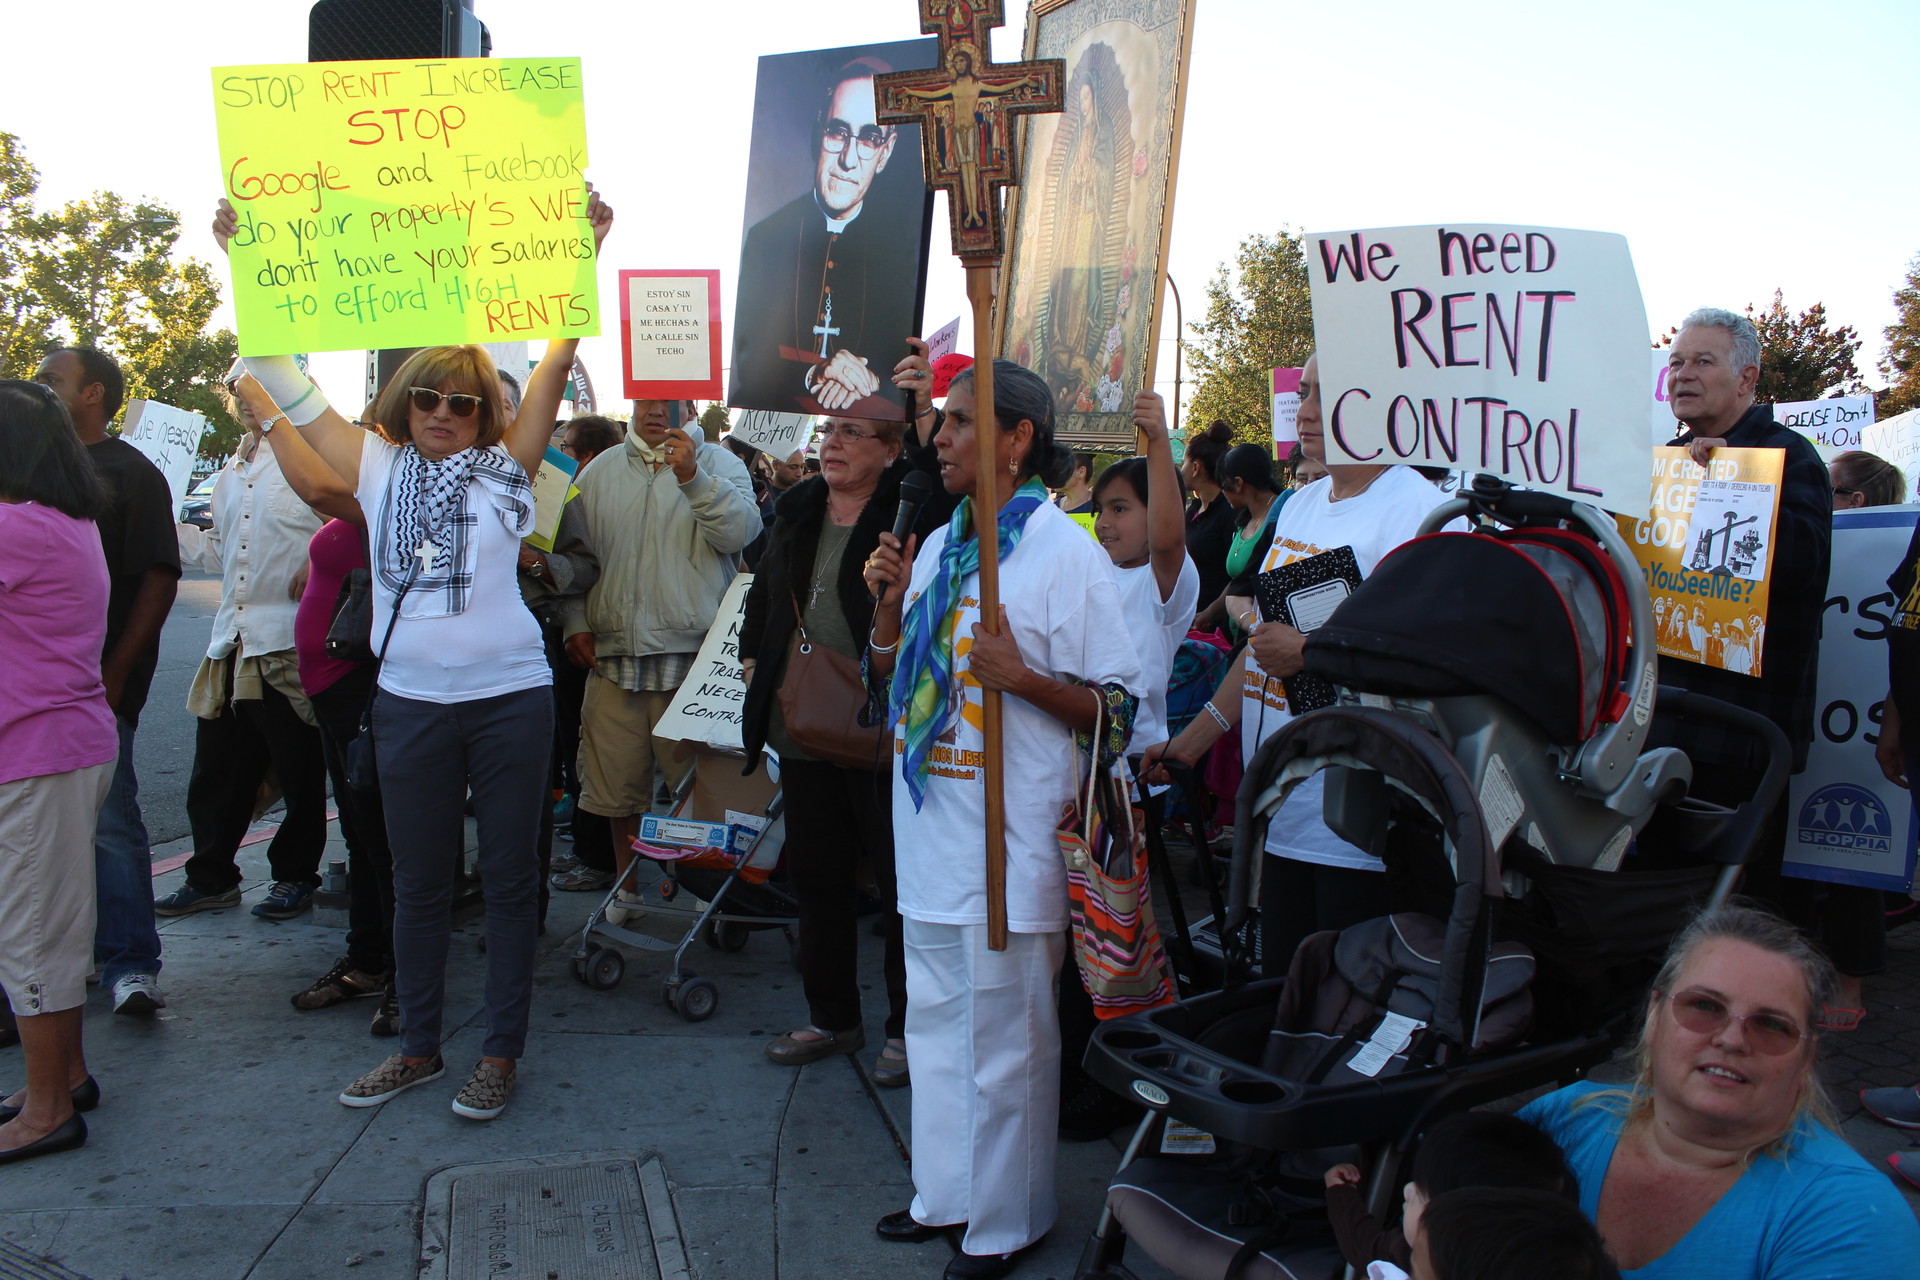 Marchers get ready to cross El Camino Real in Redwood City on October 1, 2015. They ask the City Council limits evictions and rent hikes.